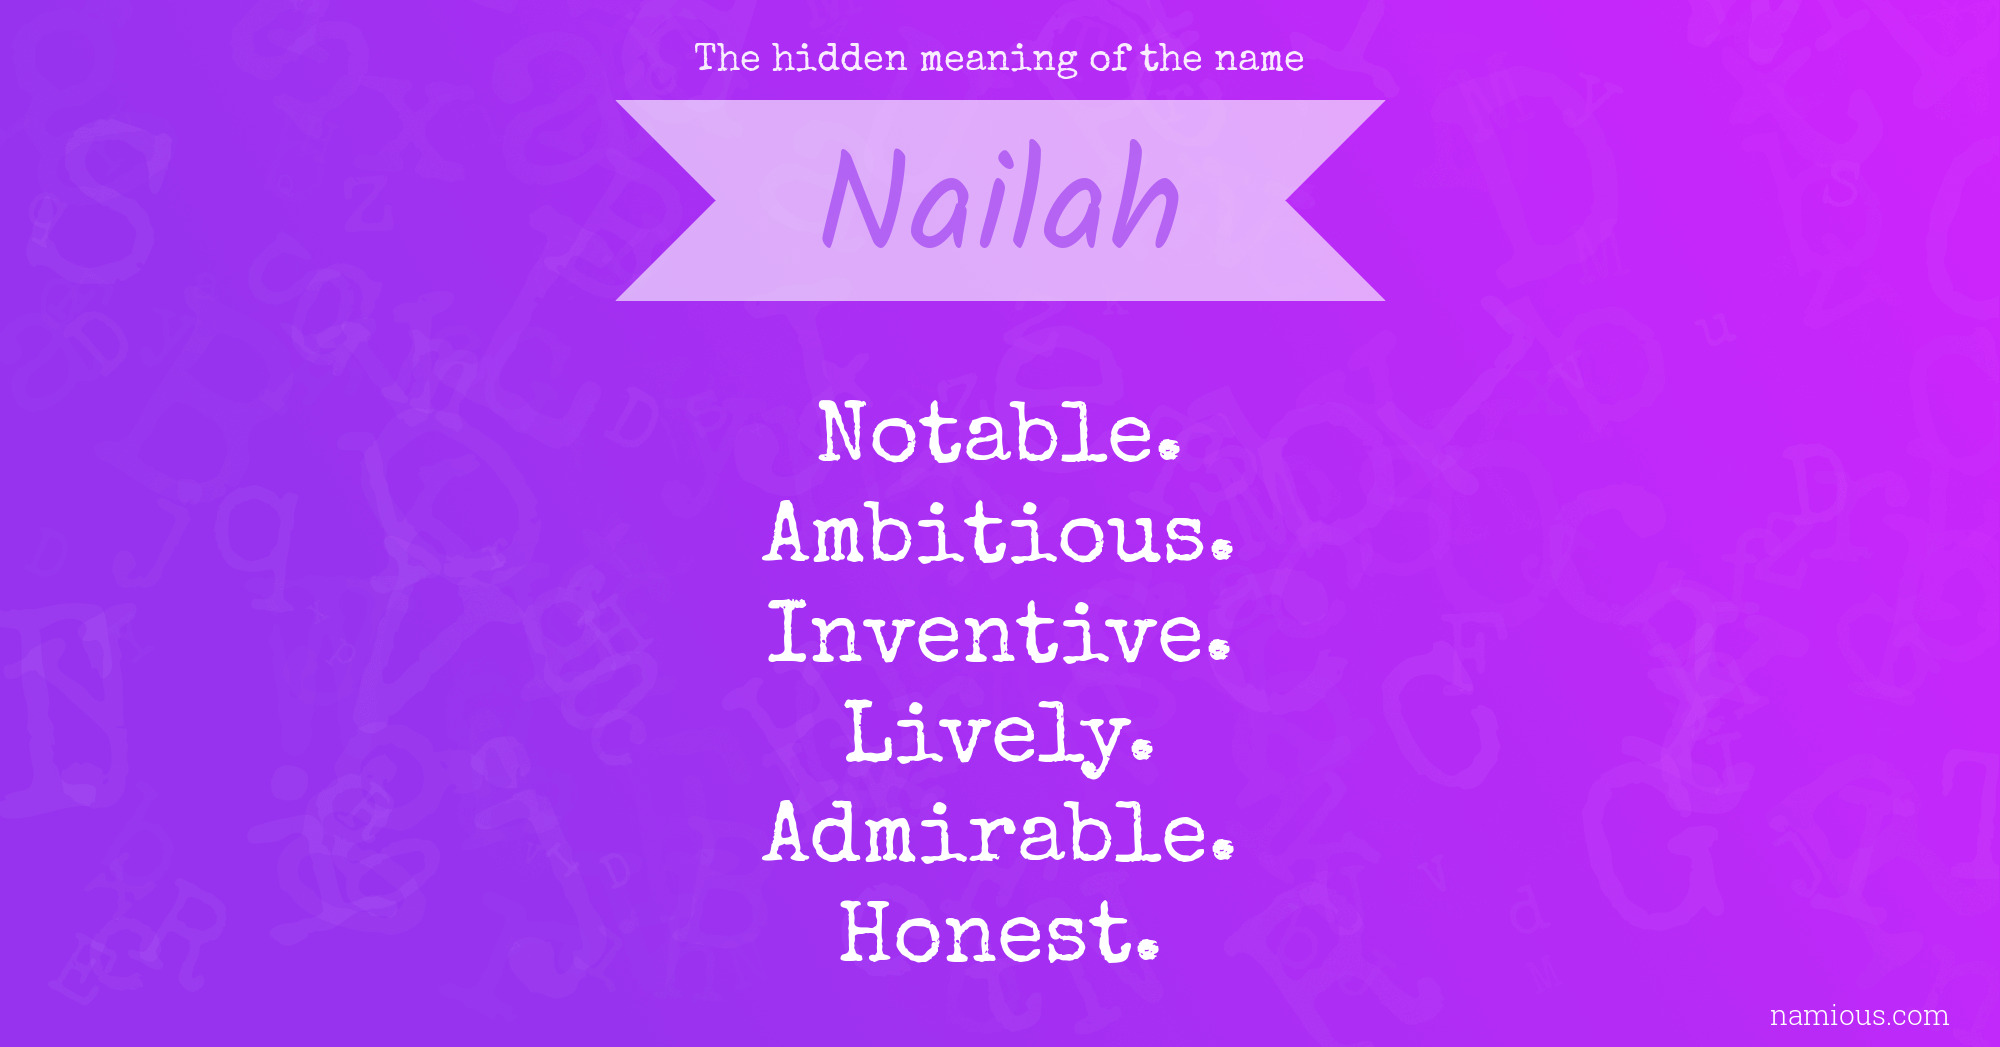 The hidden meaning of the name Nailah